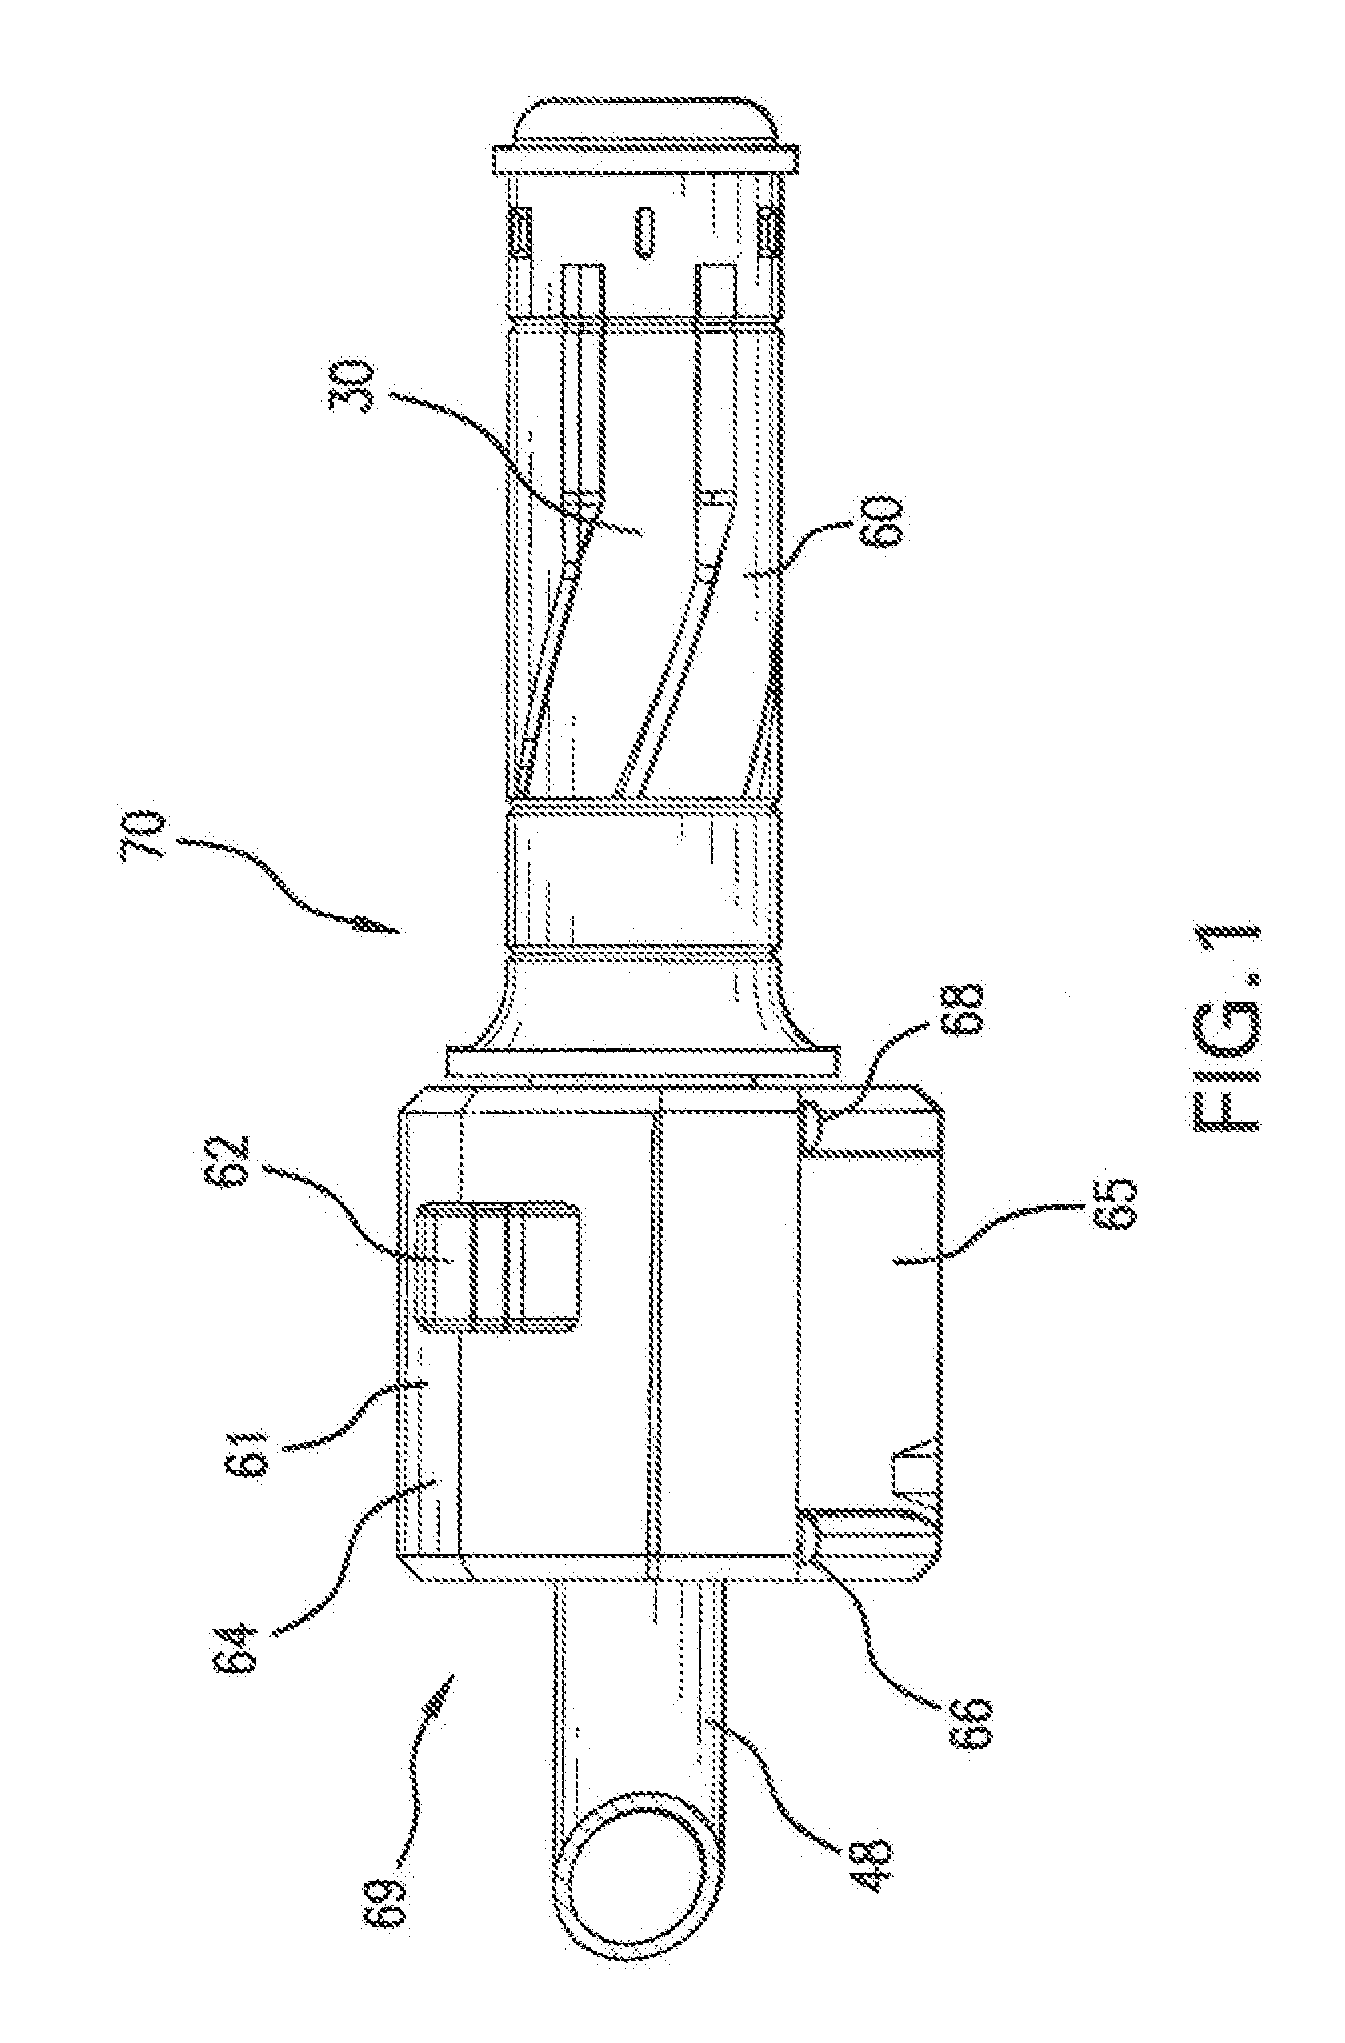 Vehicle With Contactless Throttle Control